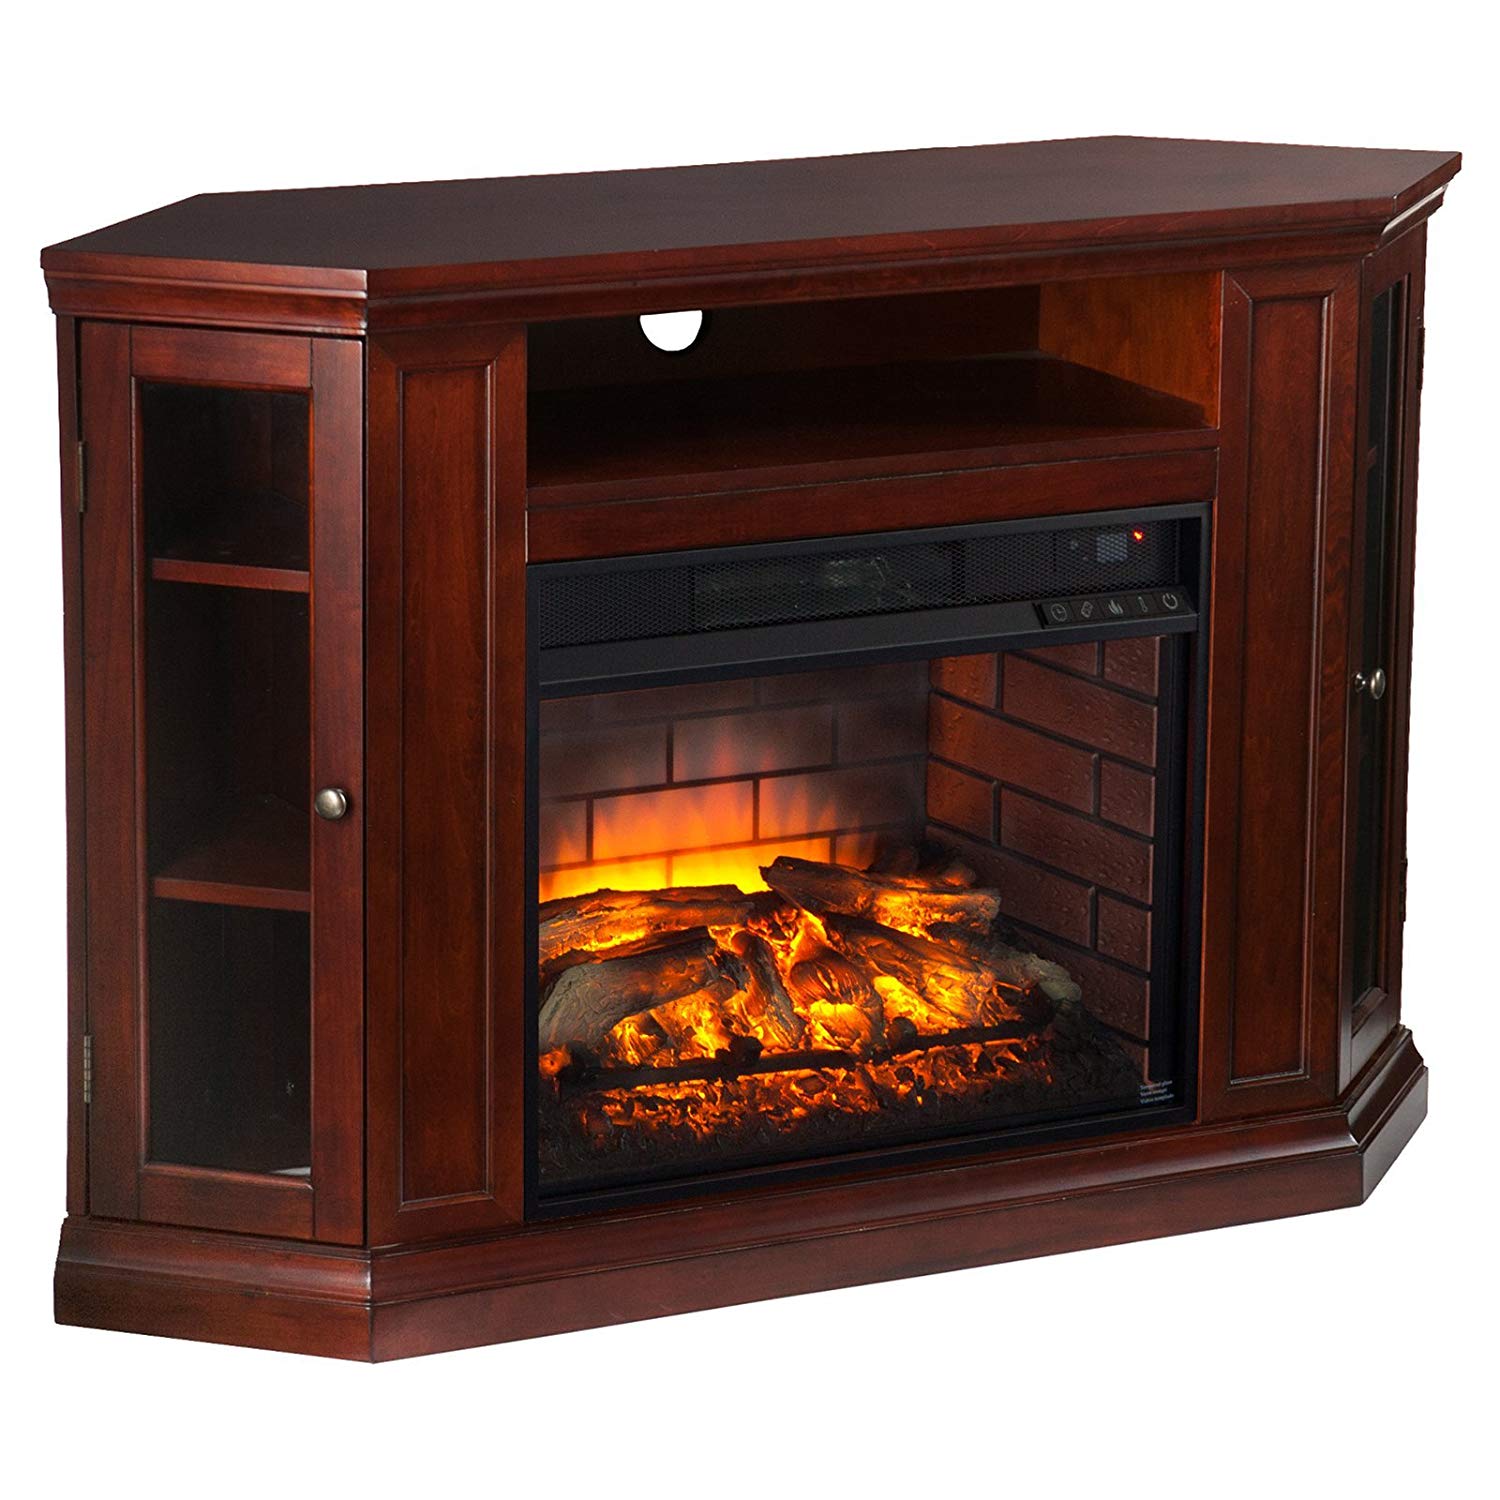 Real Flame Corner Fireplace Beautiful southern Enterprises Claremont Corner Fireplace Tv Stand In Mahogany